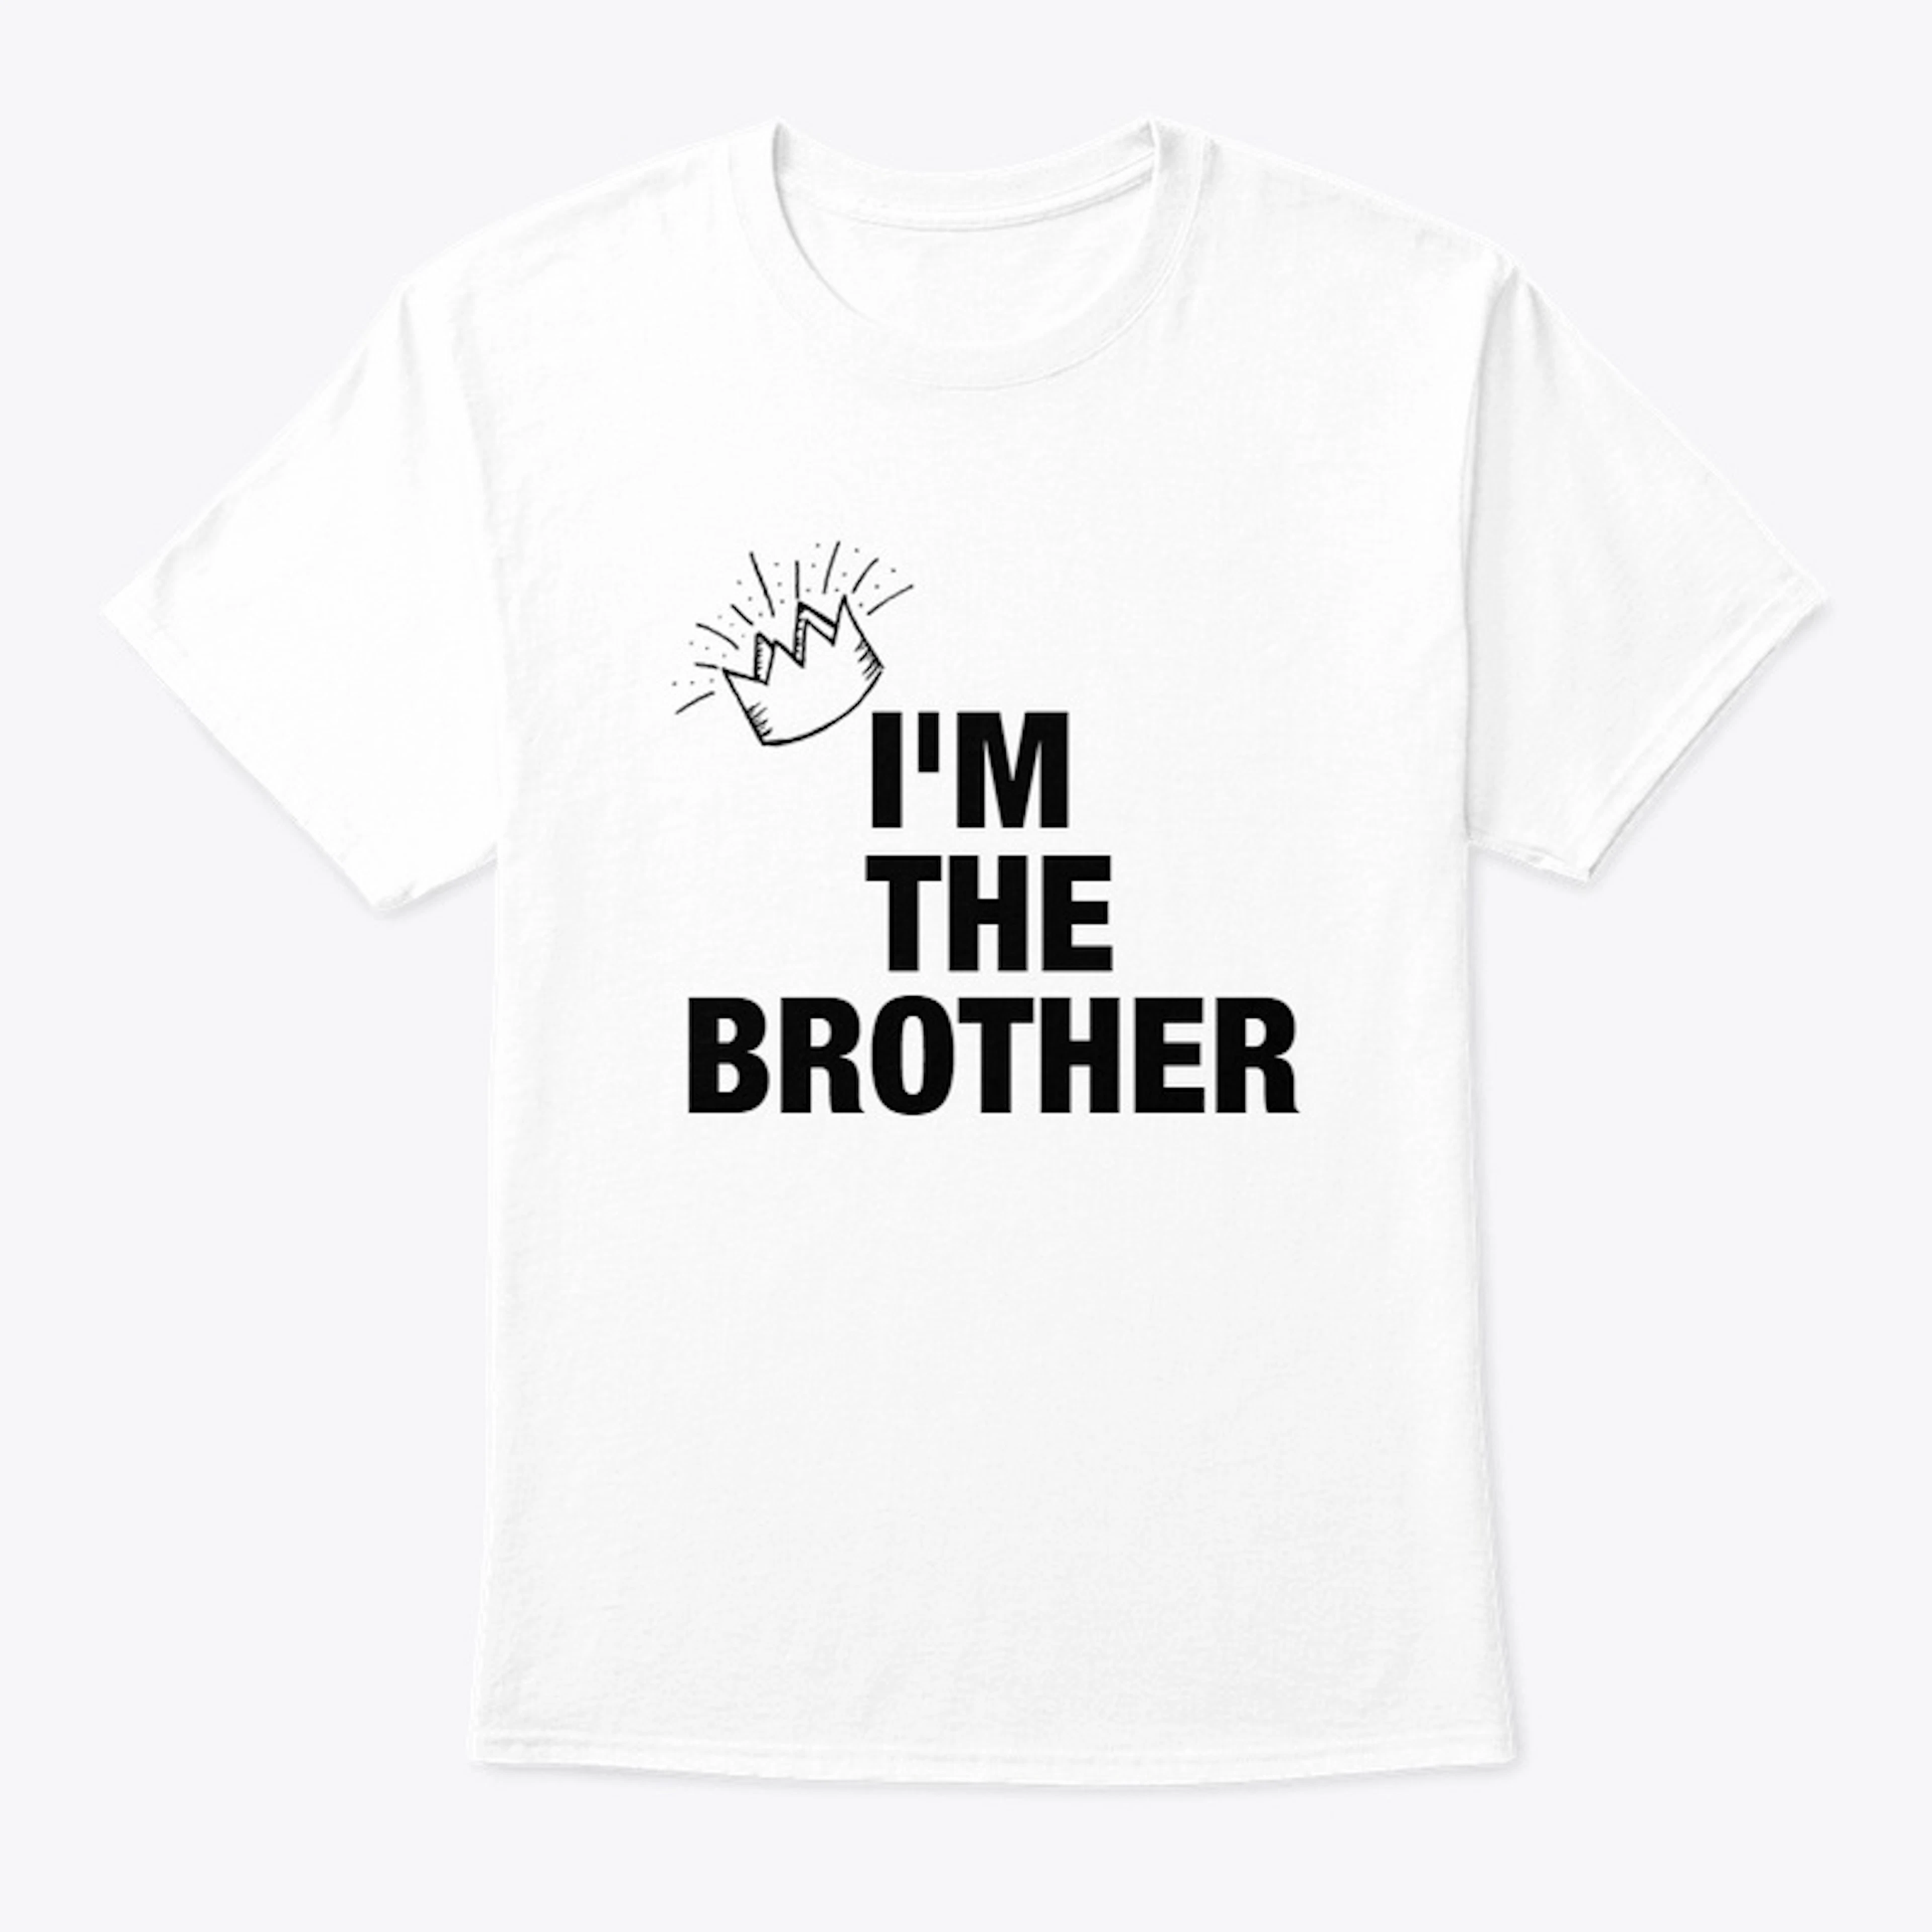 I'm the brother T-shirt 